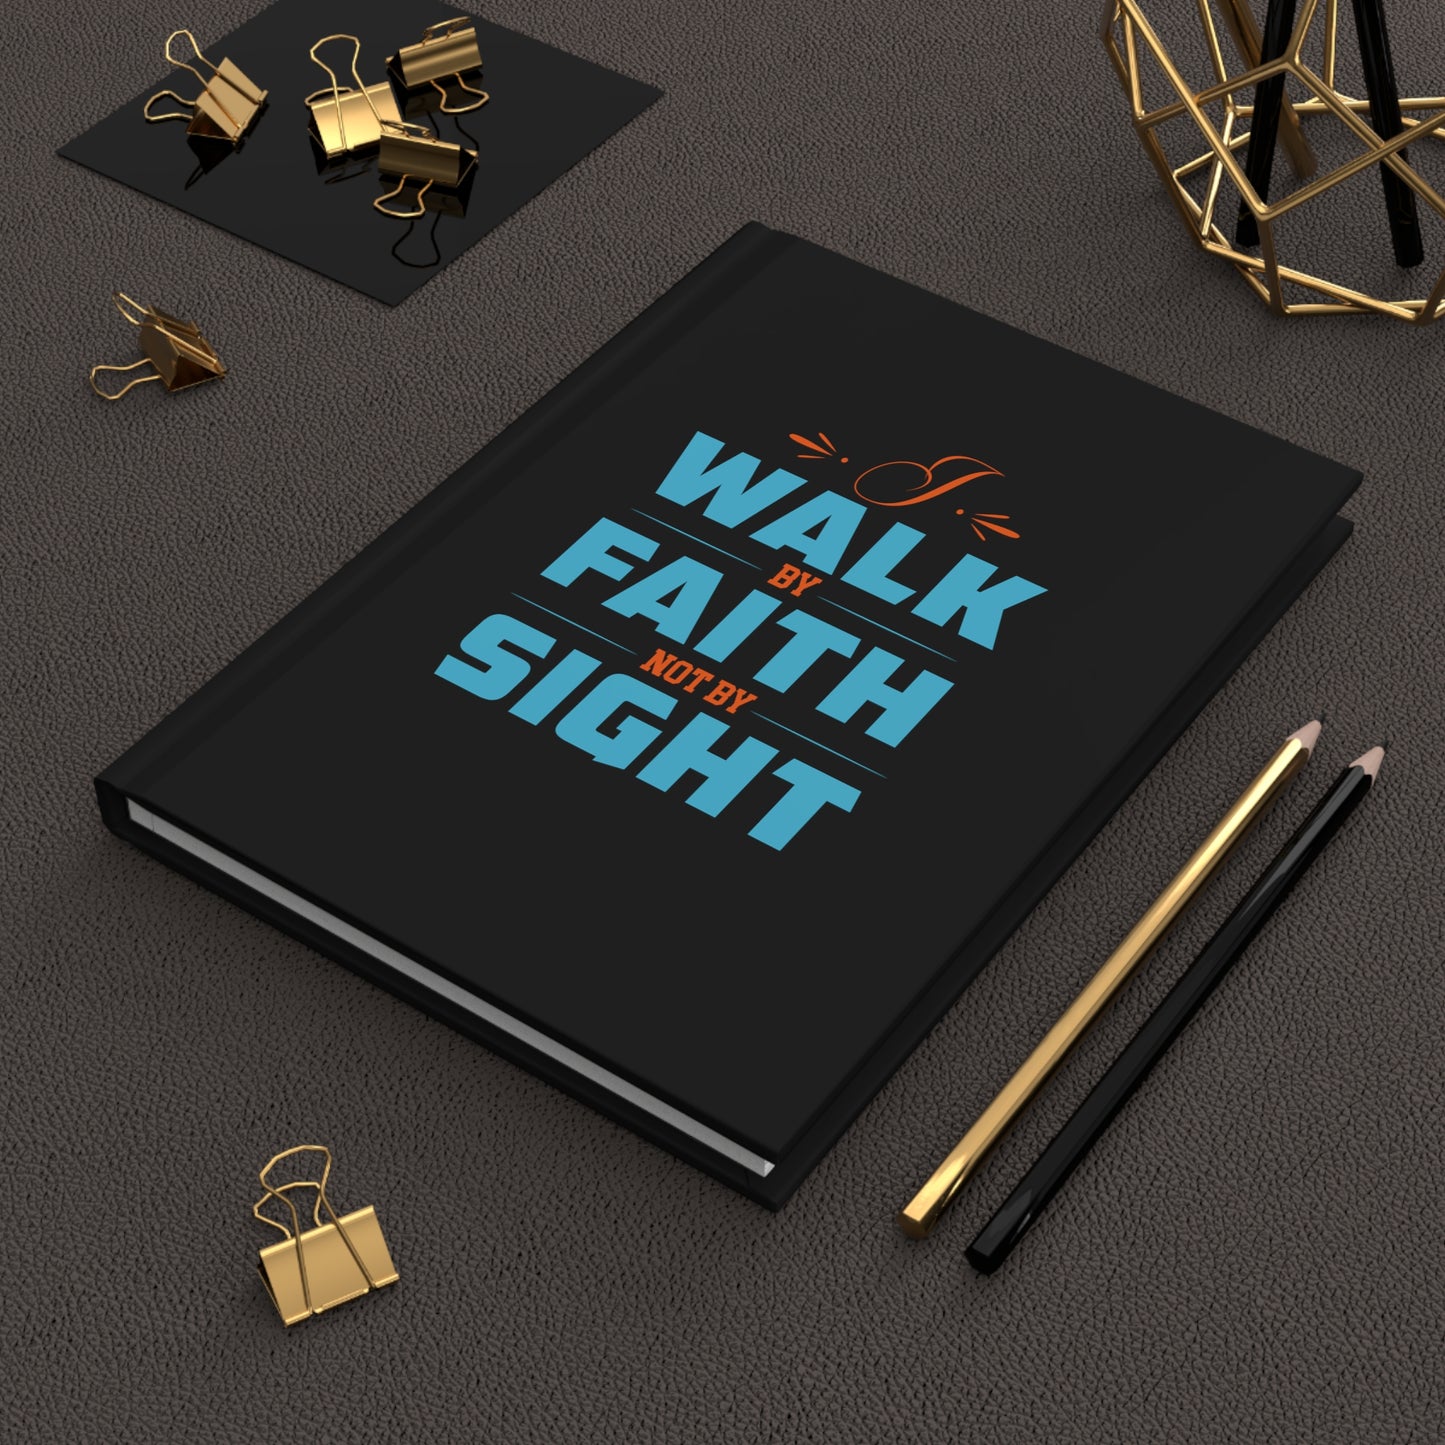 I Walk By Faith Not By Sight Hardcover Journal Matte